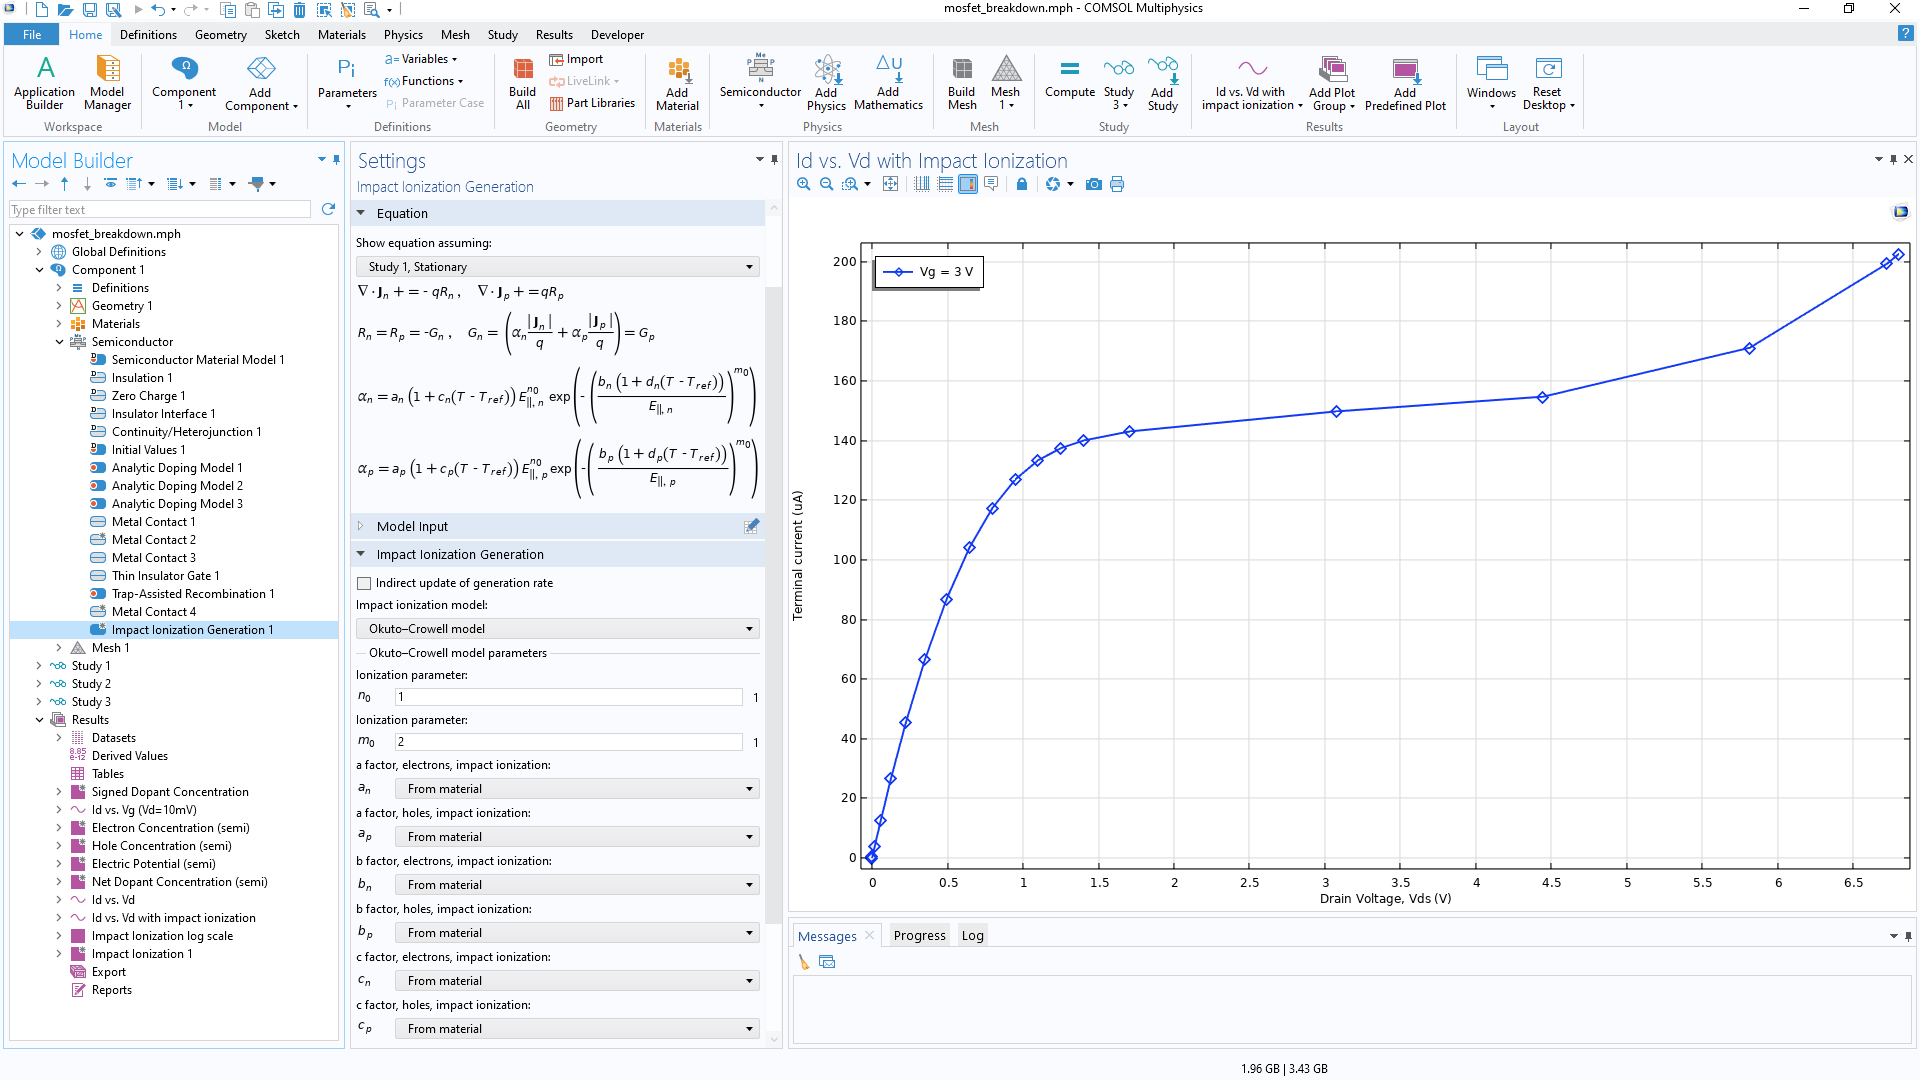 The COMSOL Multiphysics UI showing the Impact Ionization Generation node highlighted, the corresponding Settings window, and a 1D plot in the Graphics window.